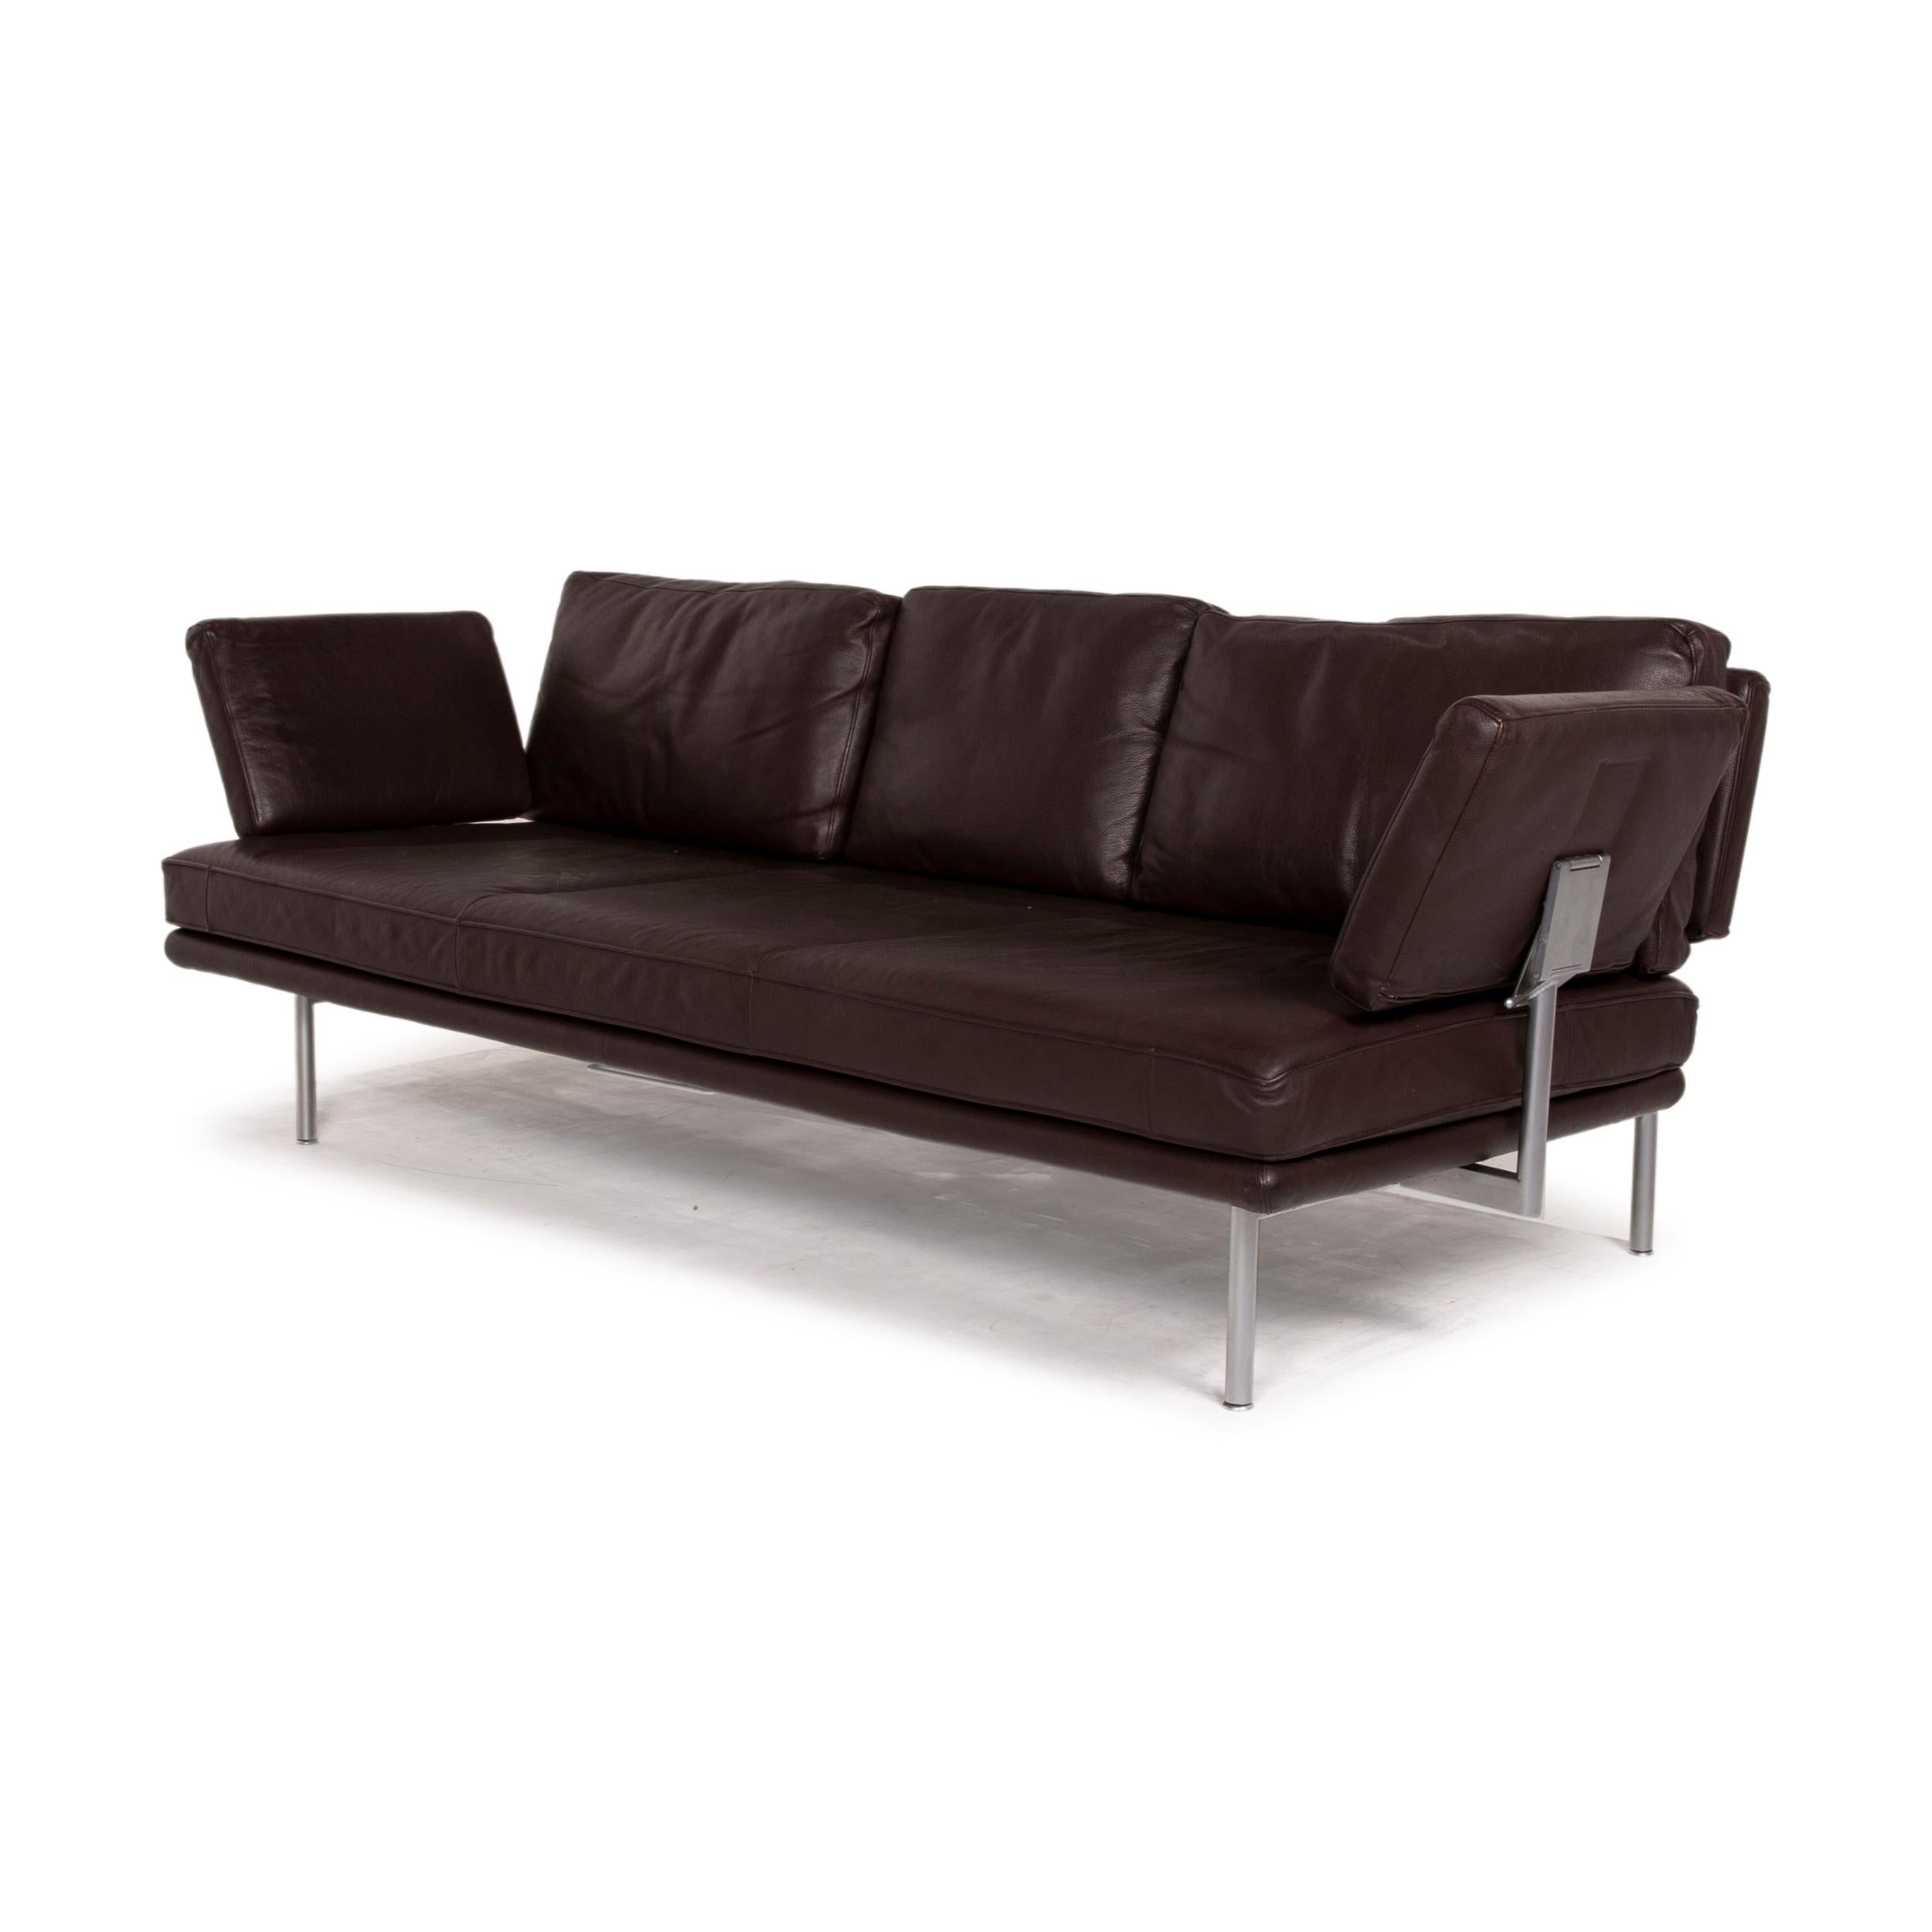 Contemporary Walter Knoll Living Platform Leather Sofa Brown Three-Seater Function Dark Brown